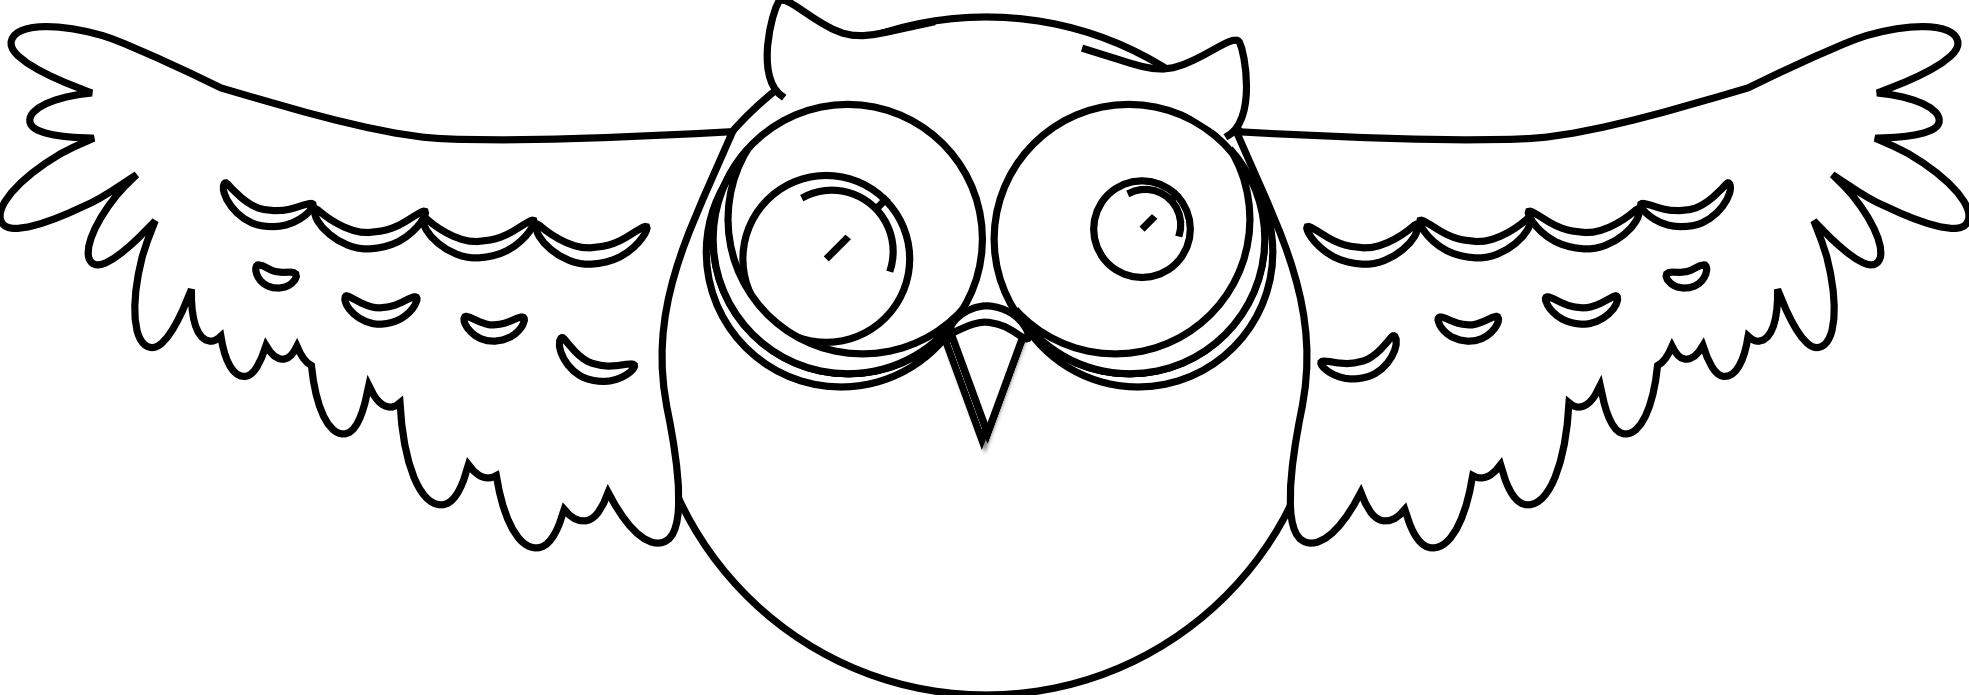 cartoon owl black white line art drawing scalable vector graphics ...